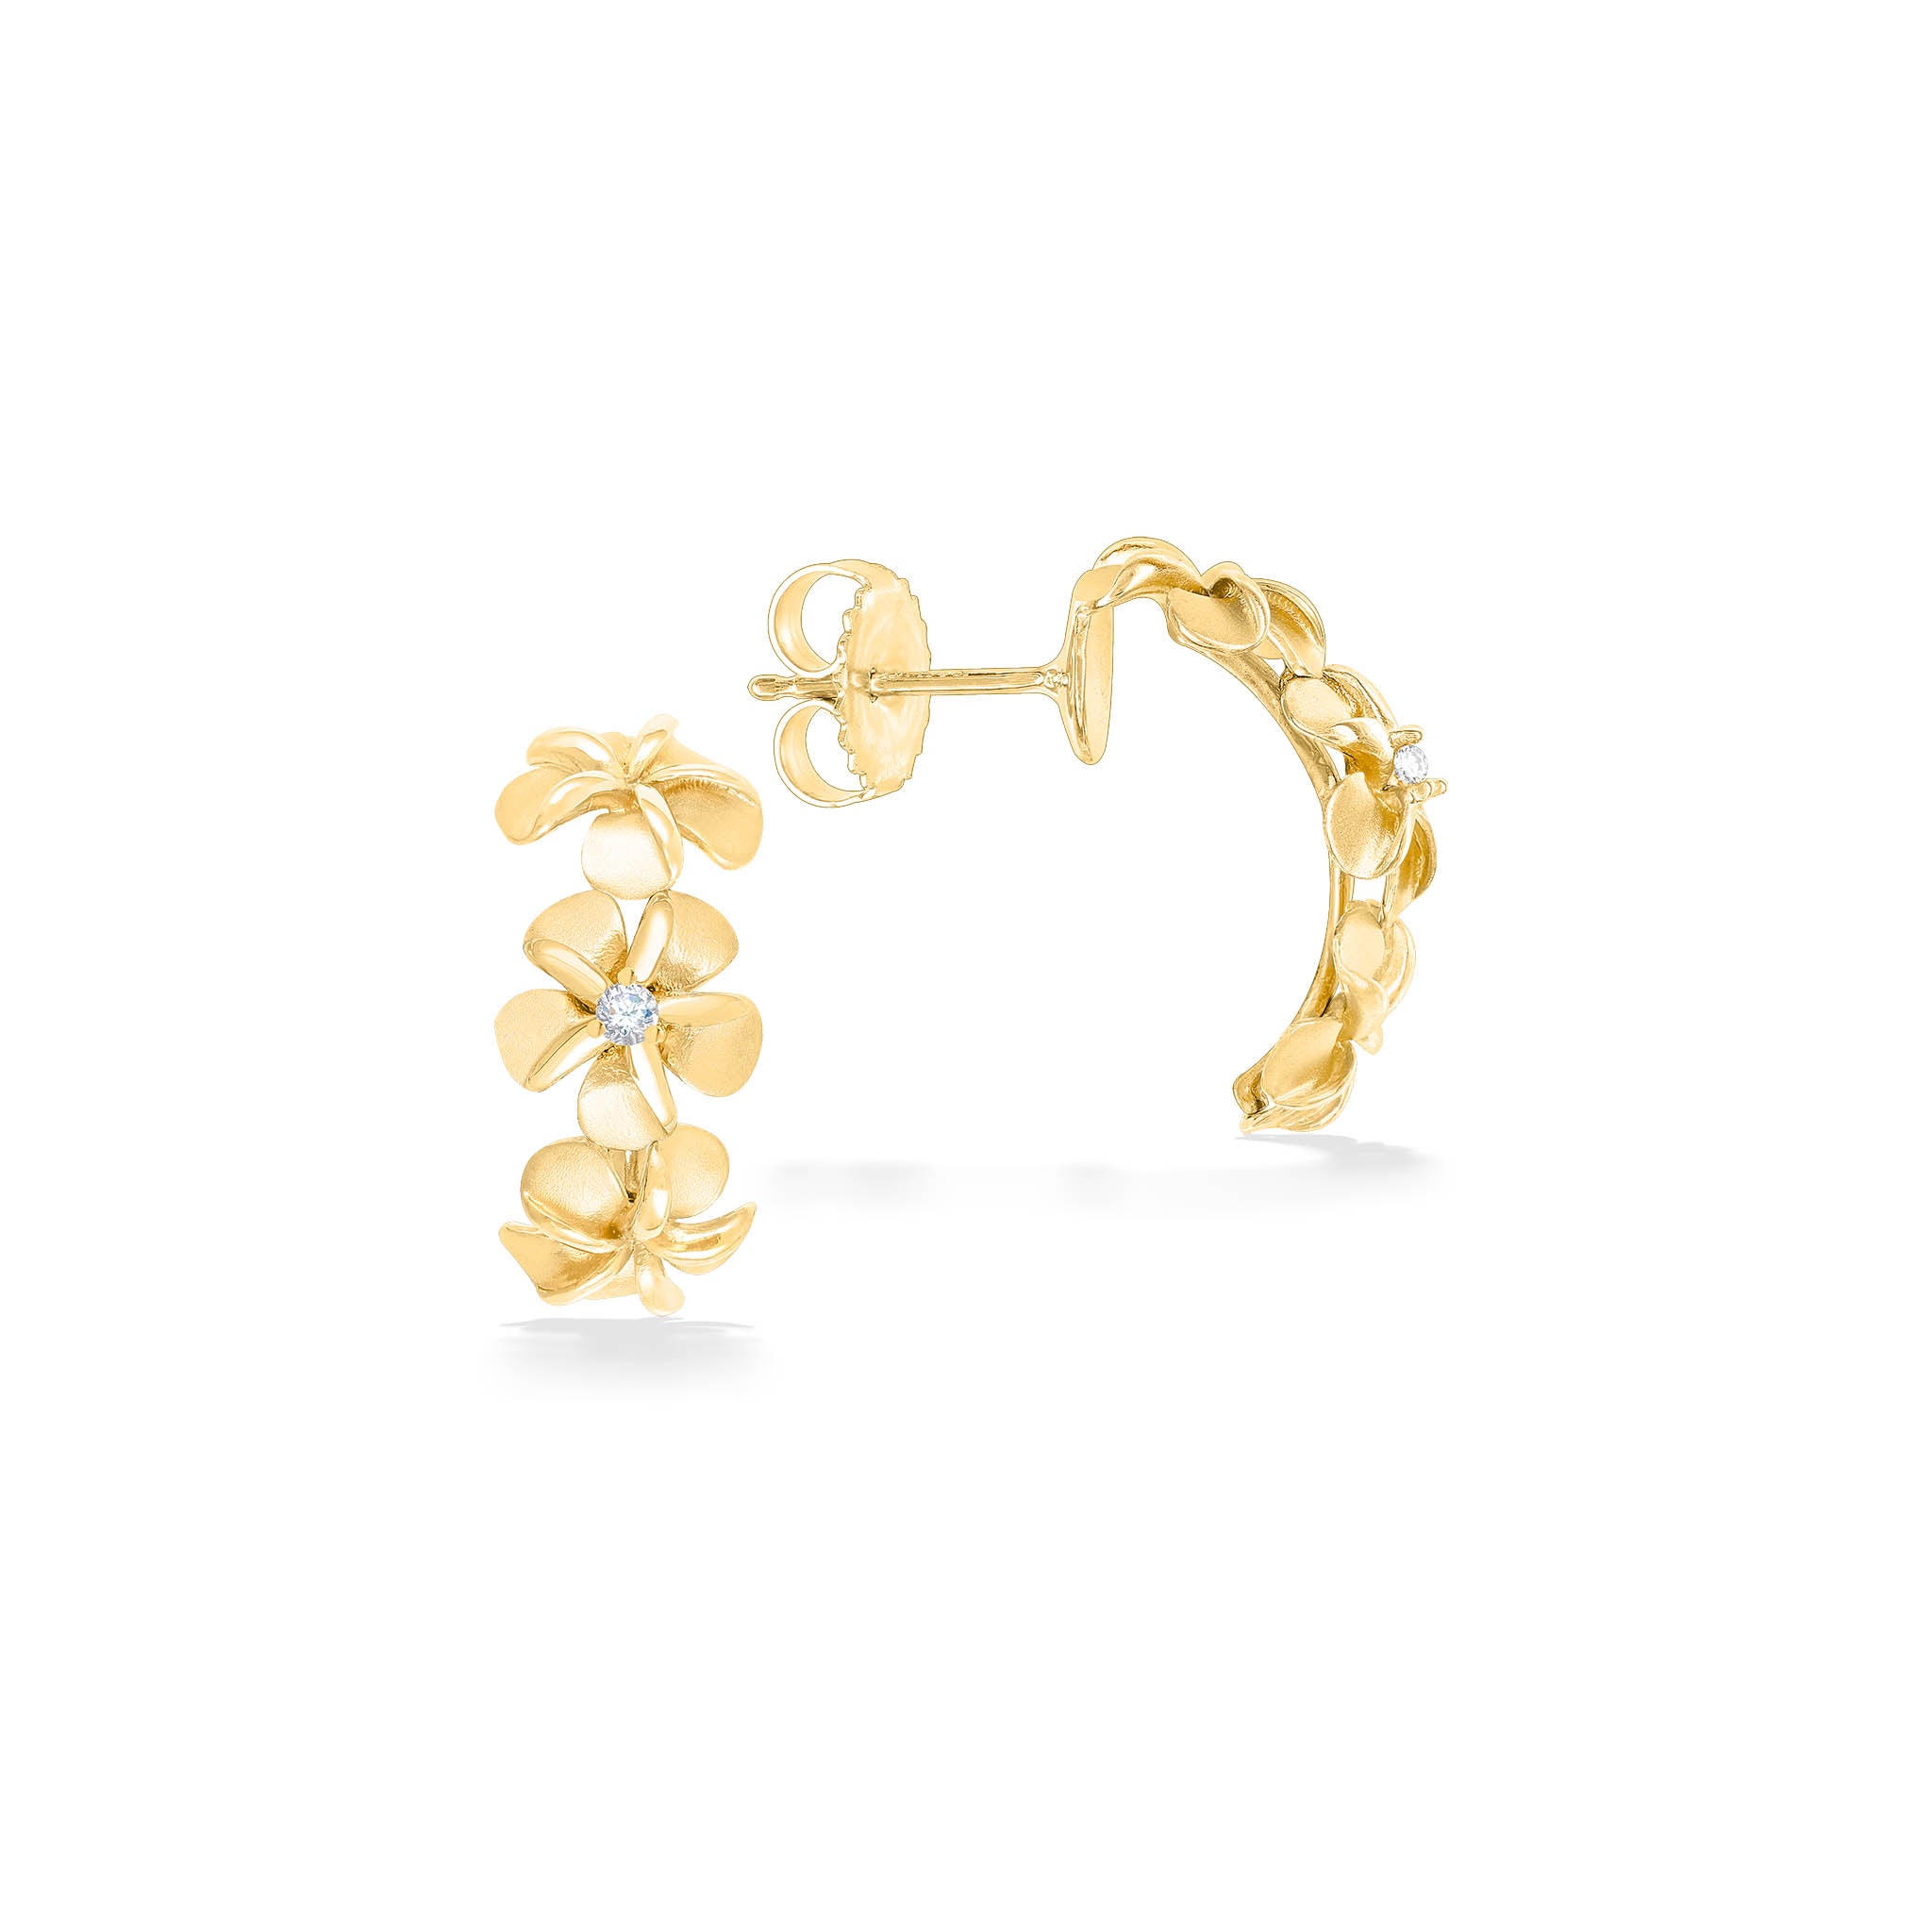 Buy Gold-Toned Earrings for Women by Outryt Online | Ajio.com